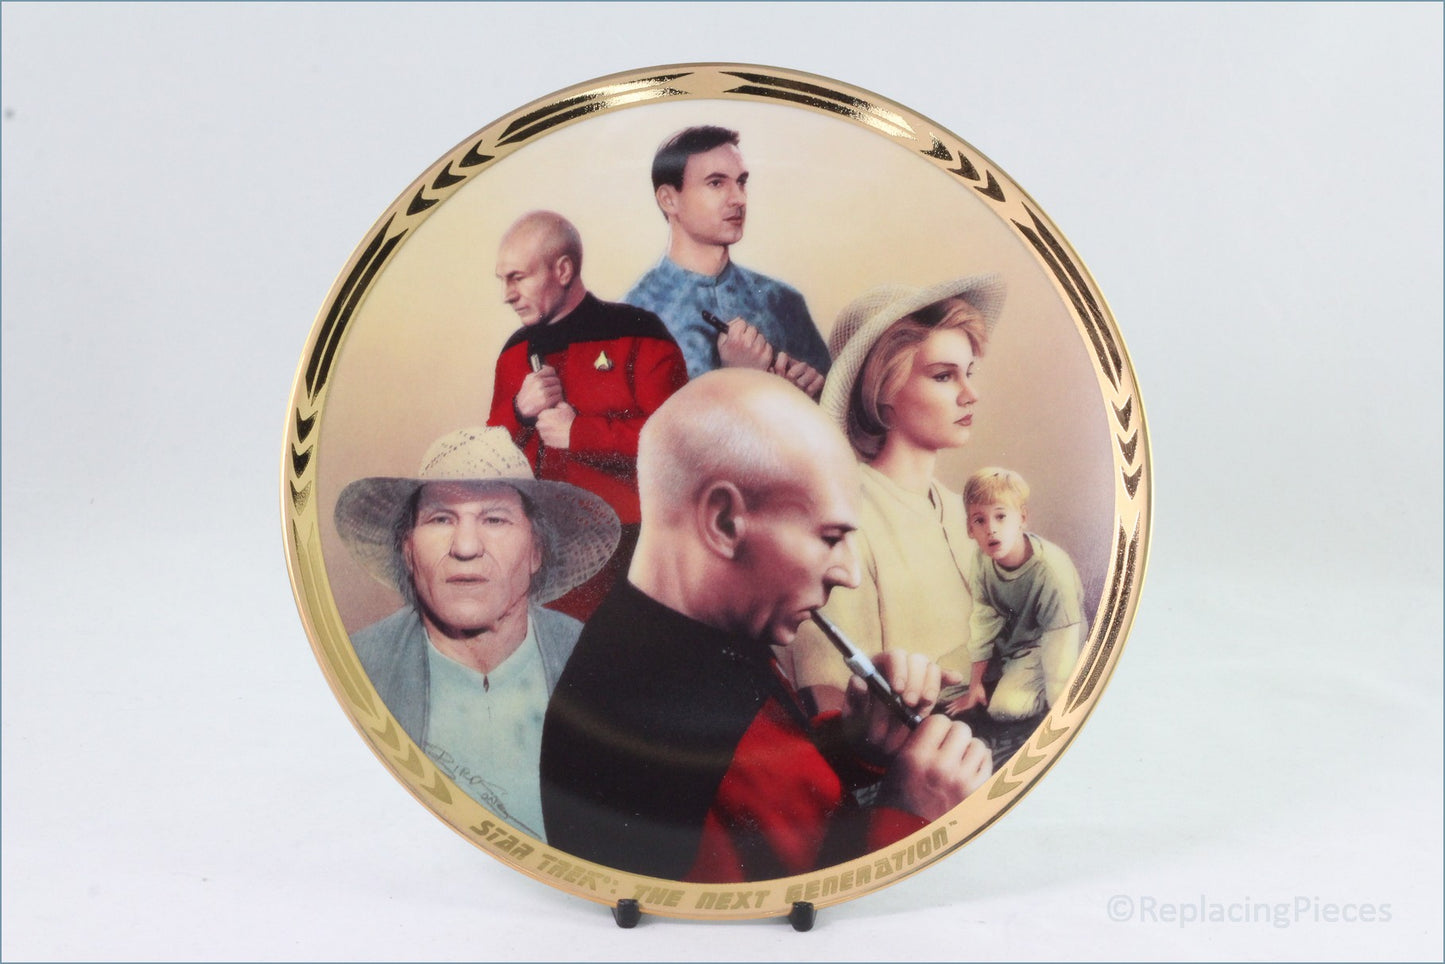 The Hamilton Collection - Star Trek 'The Next Generation' - The Episodes - The Inner Light